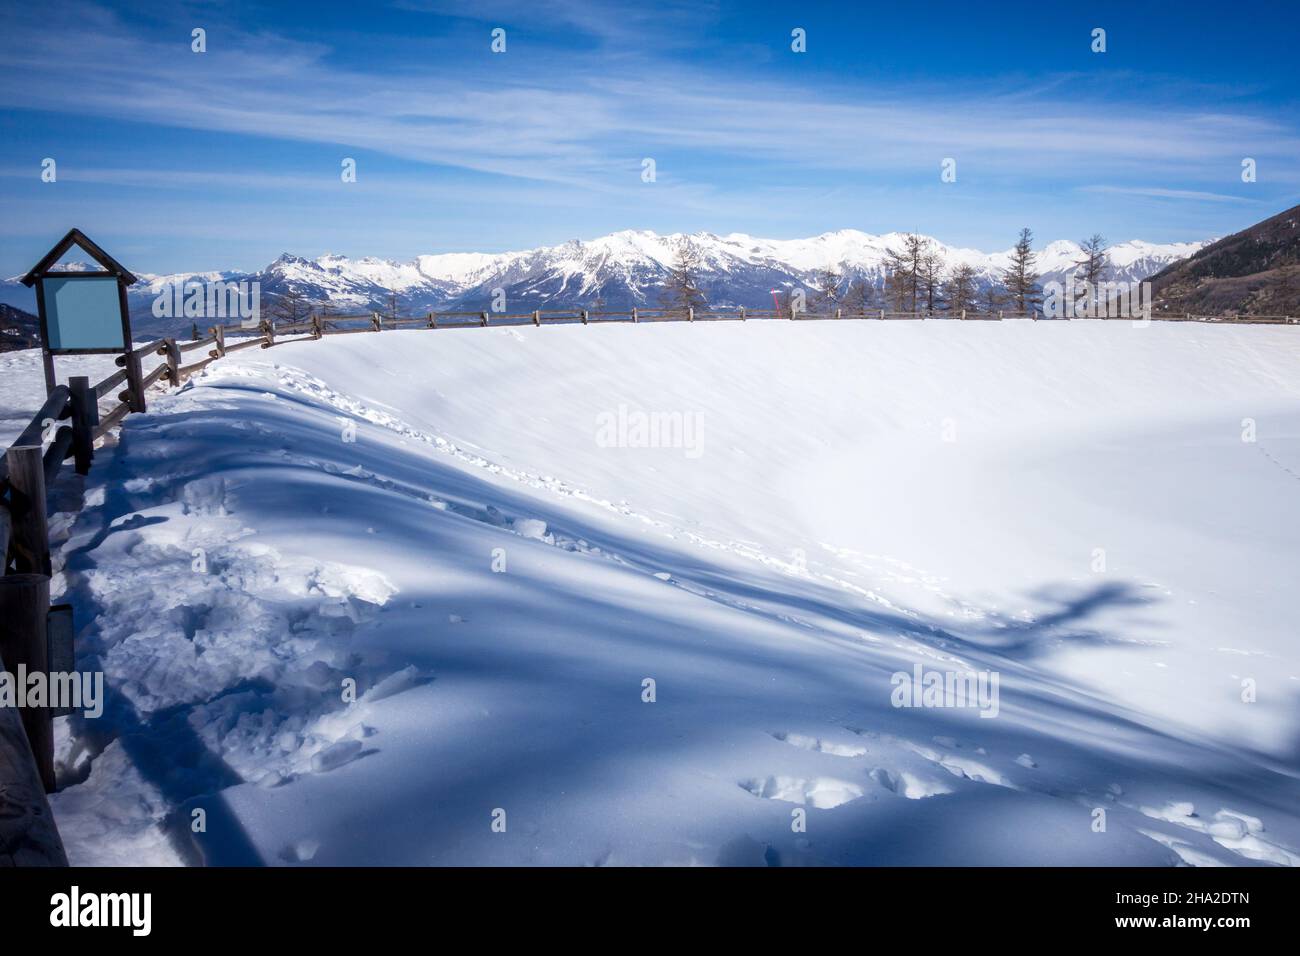 Mountain landscape under snow in winter and frozen lake Stock Photo